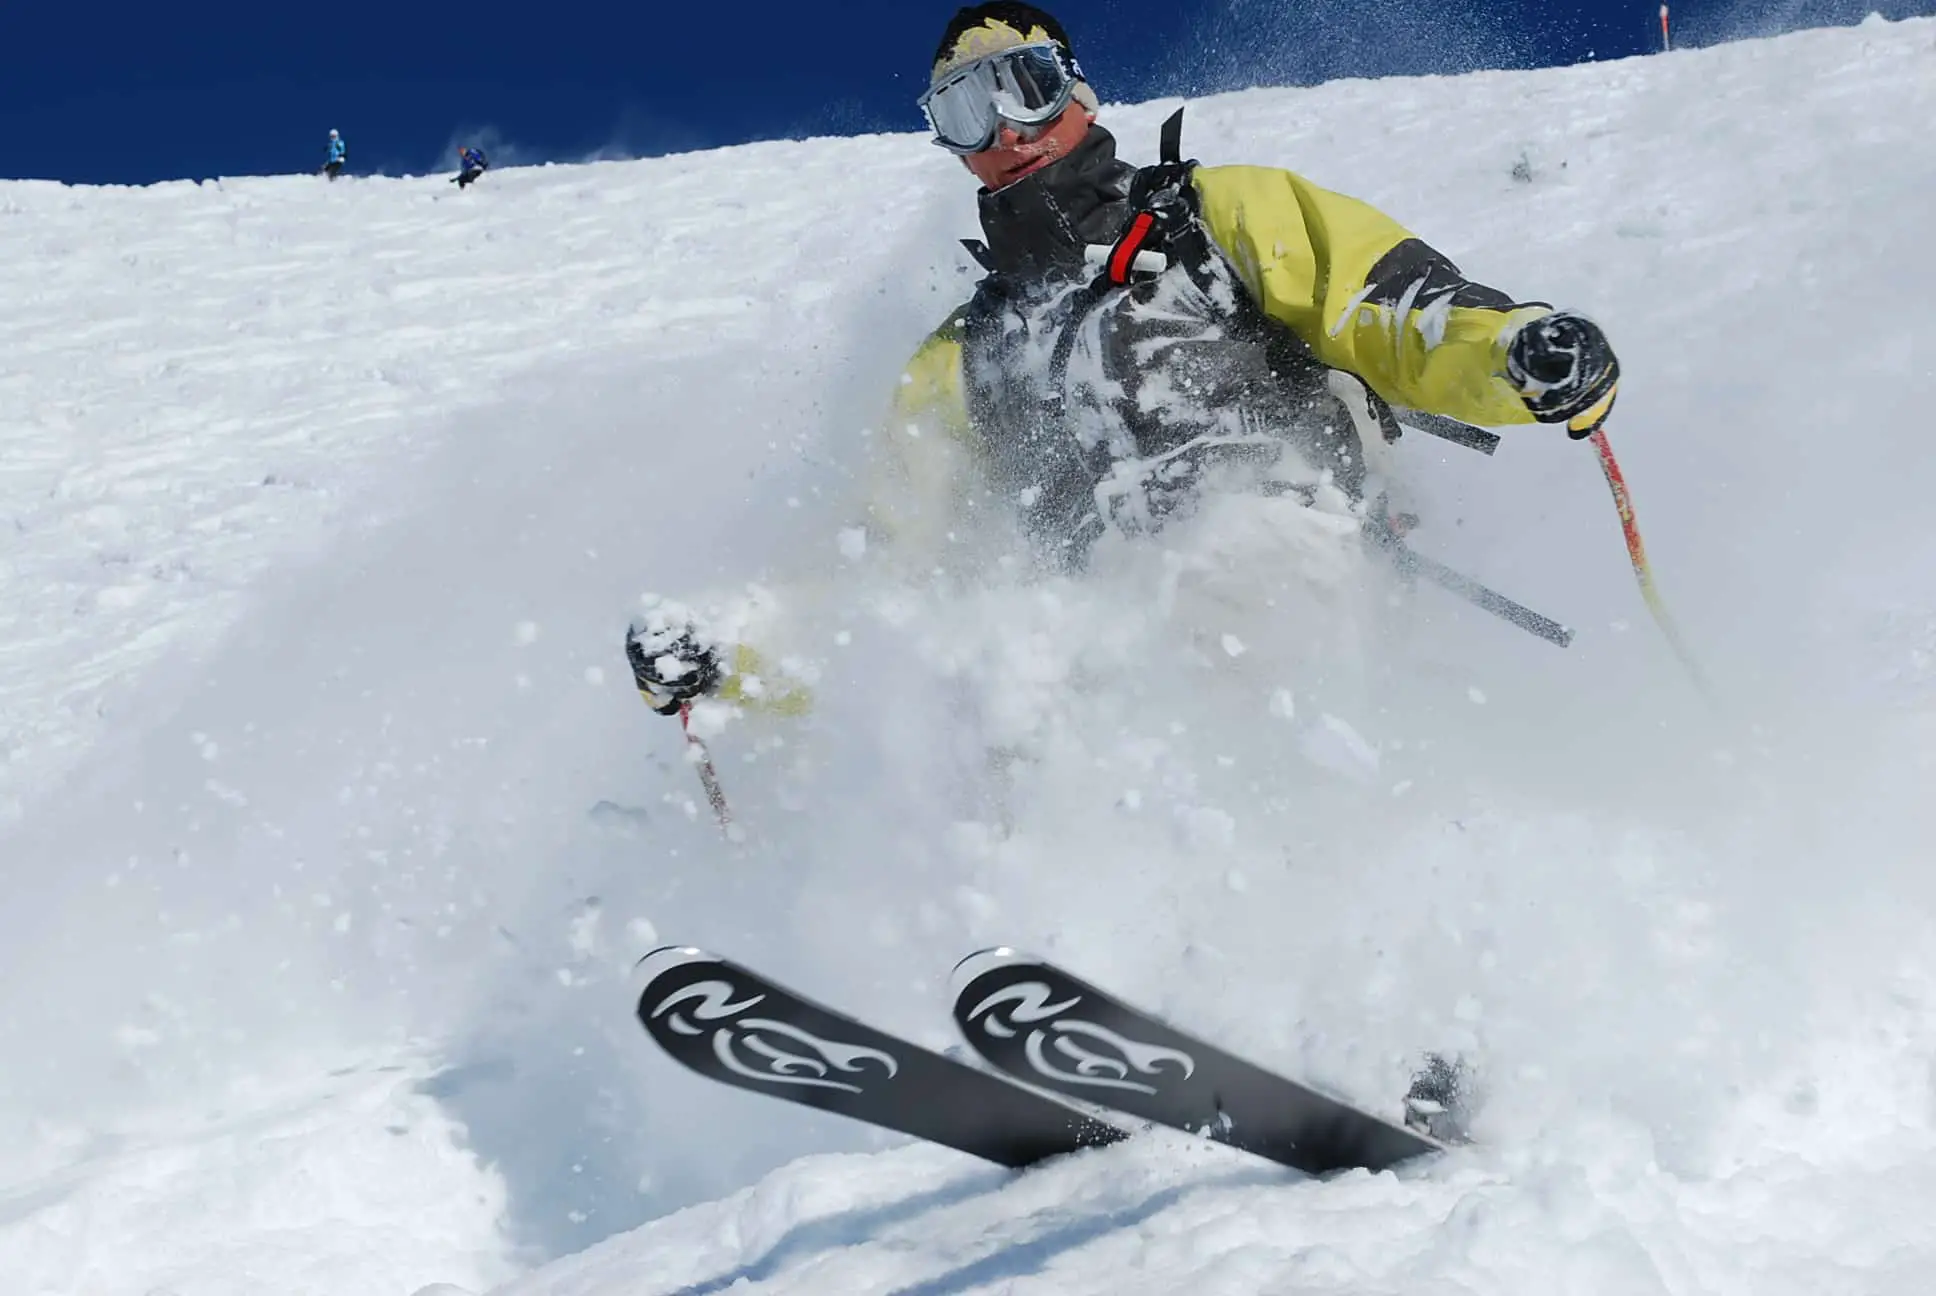 Freerider skiing deep powder, powder skiing, picture of a freerider in an article explaining the difference between freeriding, powder skiing, backcountry skiing and mounaineering